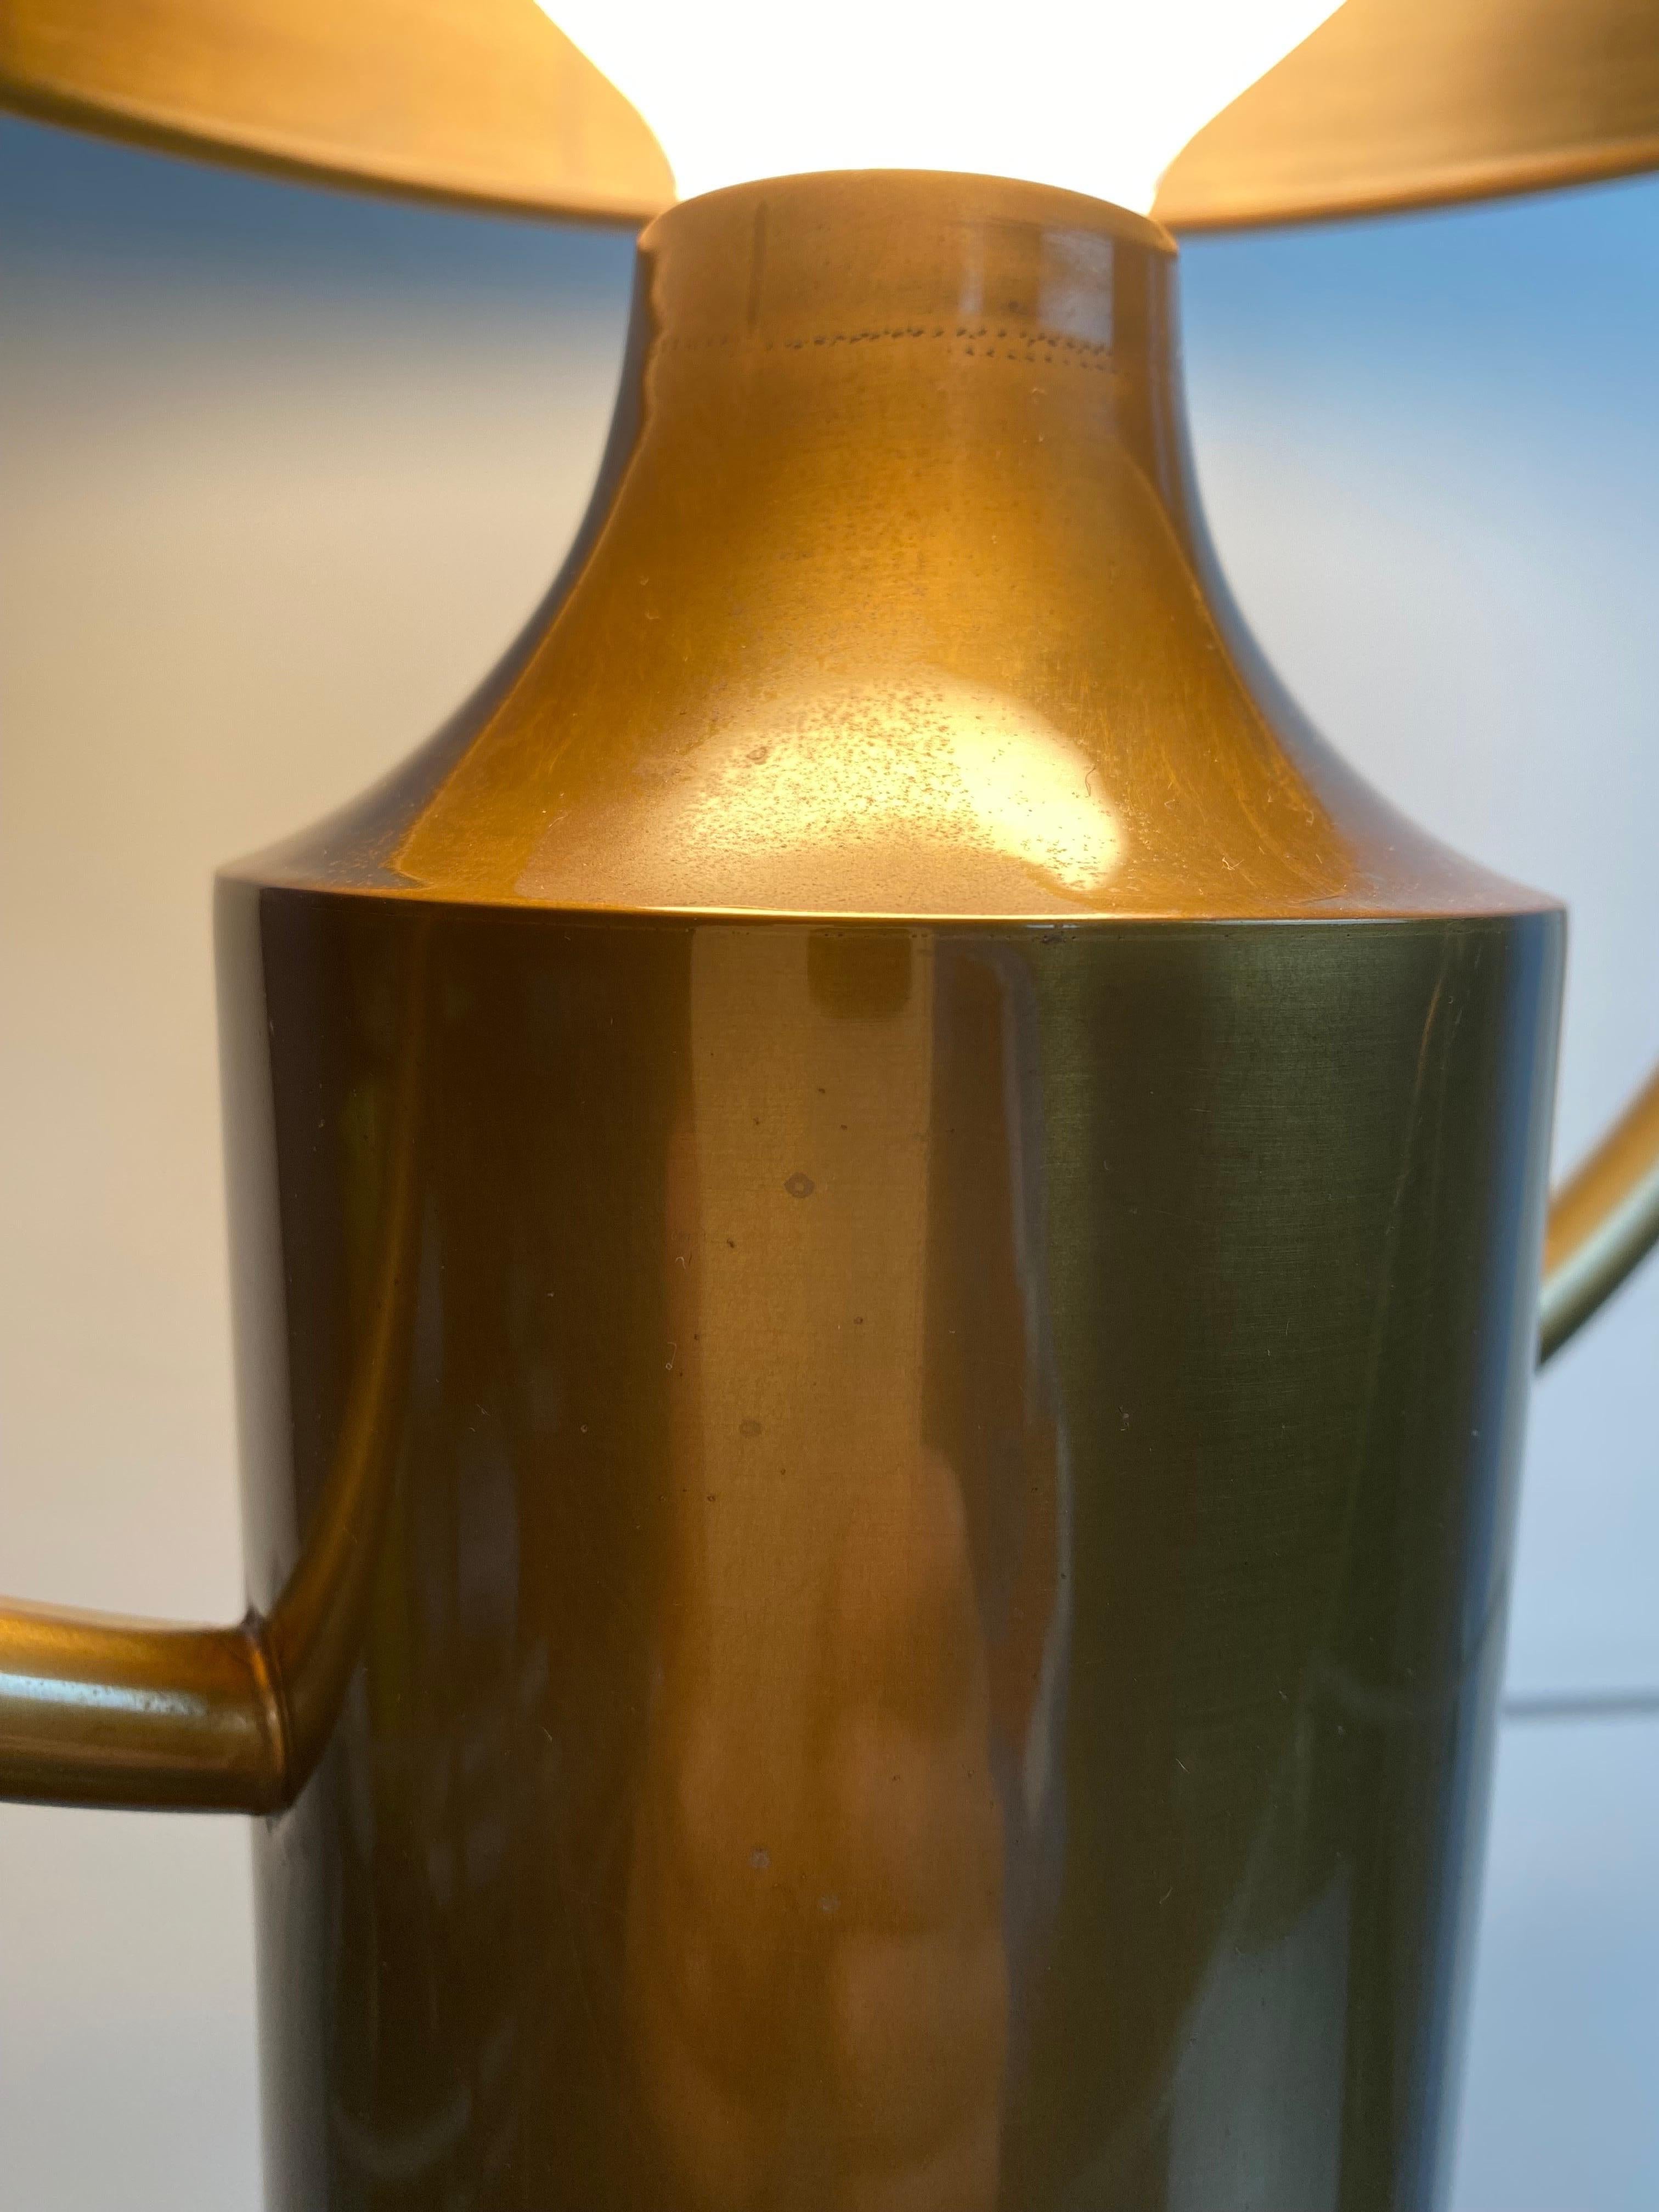 Rare German Midcentury Table Lamp in Solid Brass by Günter&Florian Schulz 1970s For Sale 4